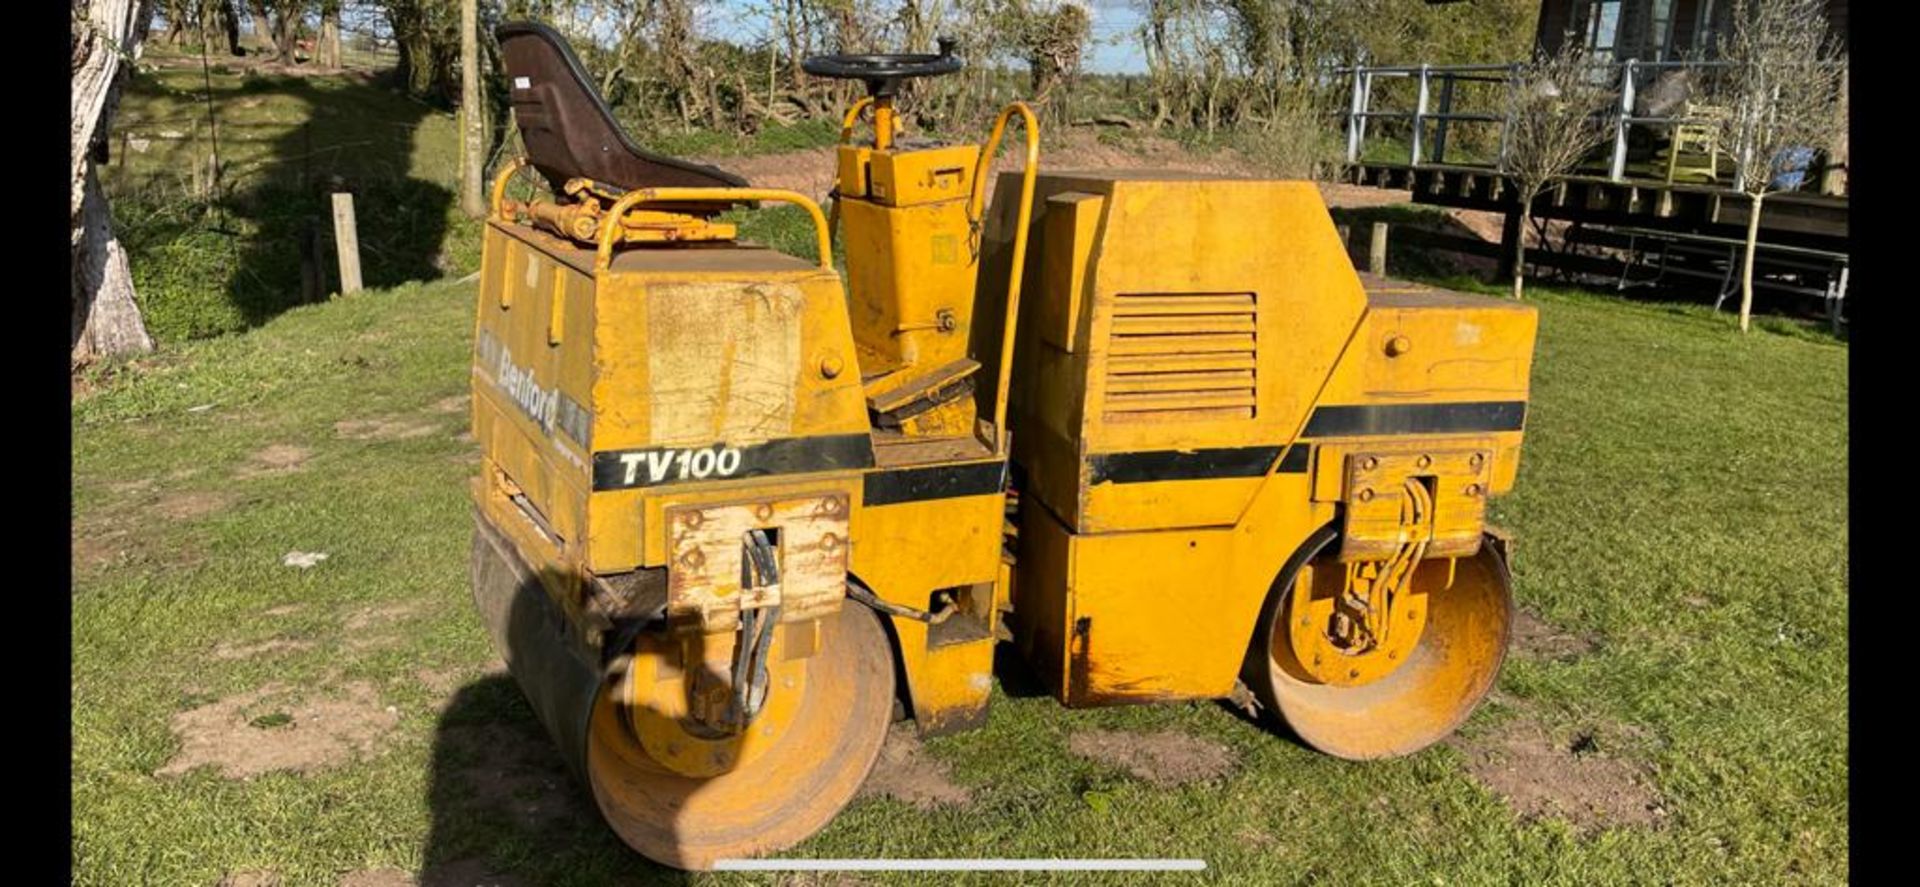 BENFORD TV 100 1000MM ROAD ROLLER TWIN DRUM VIBRATING LISTER ENGINE, OWNED FOR 20+ YEARS *PLUS VAT*